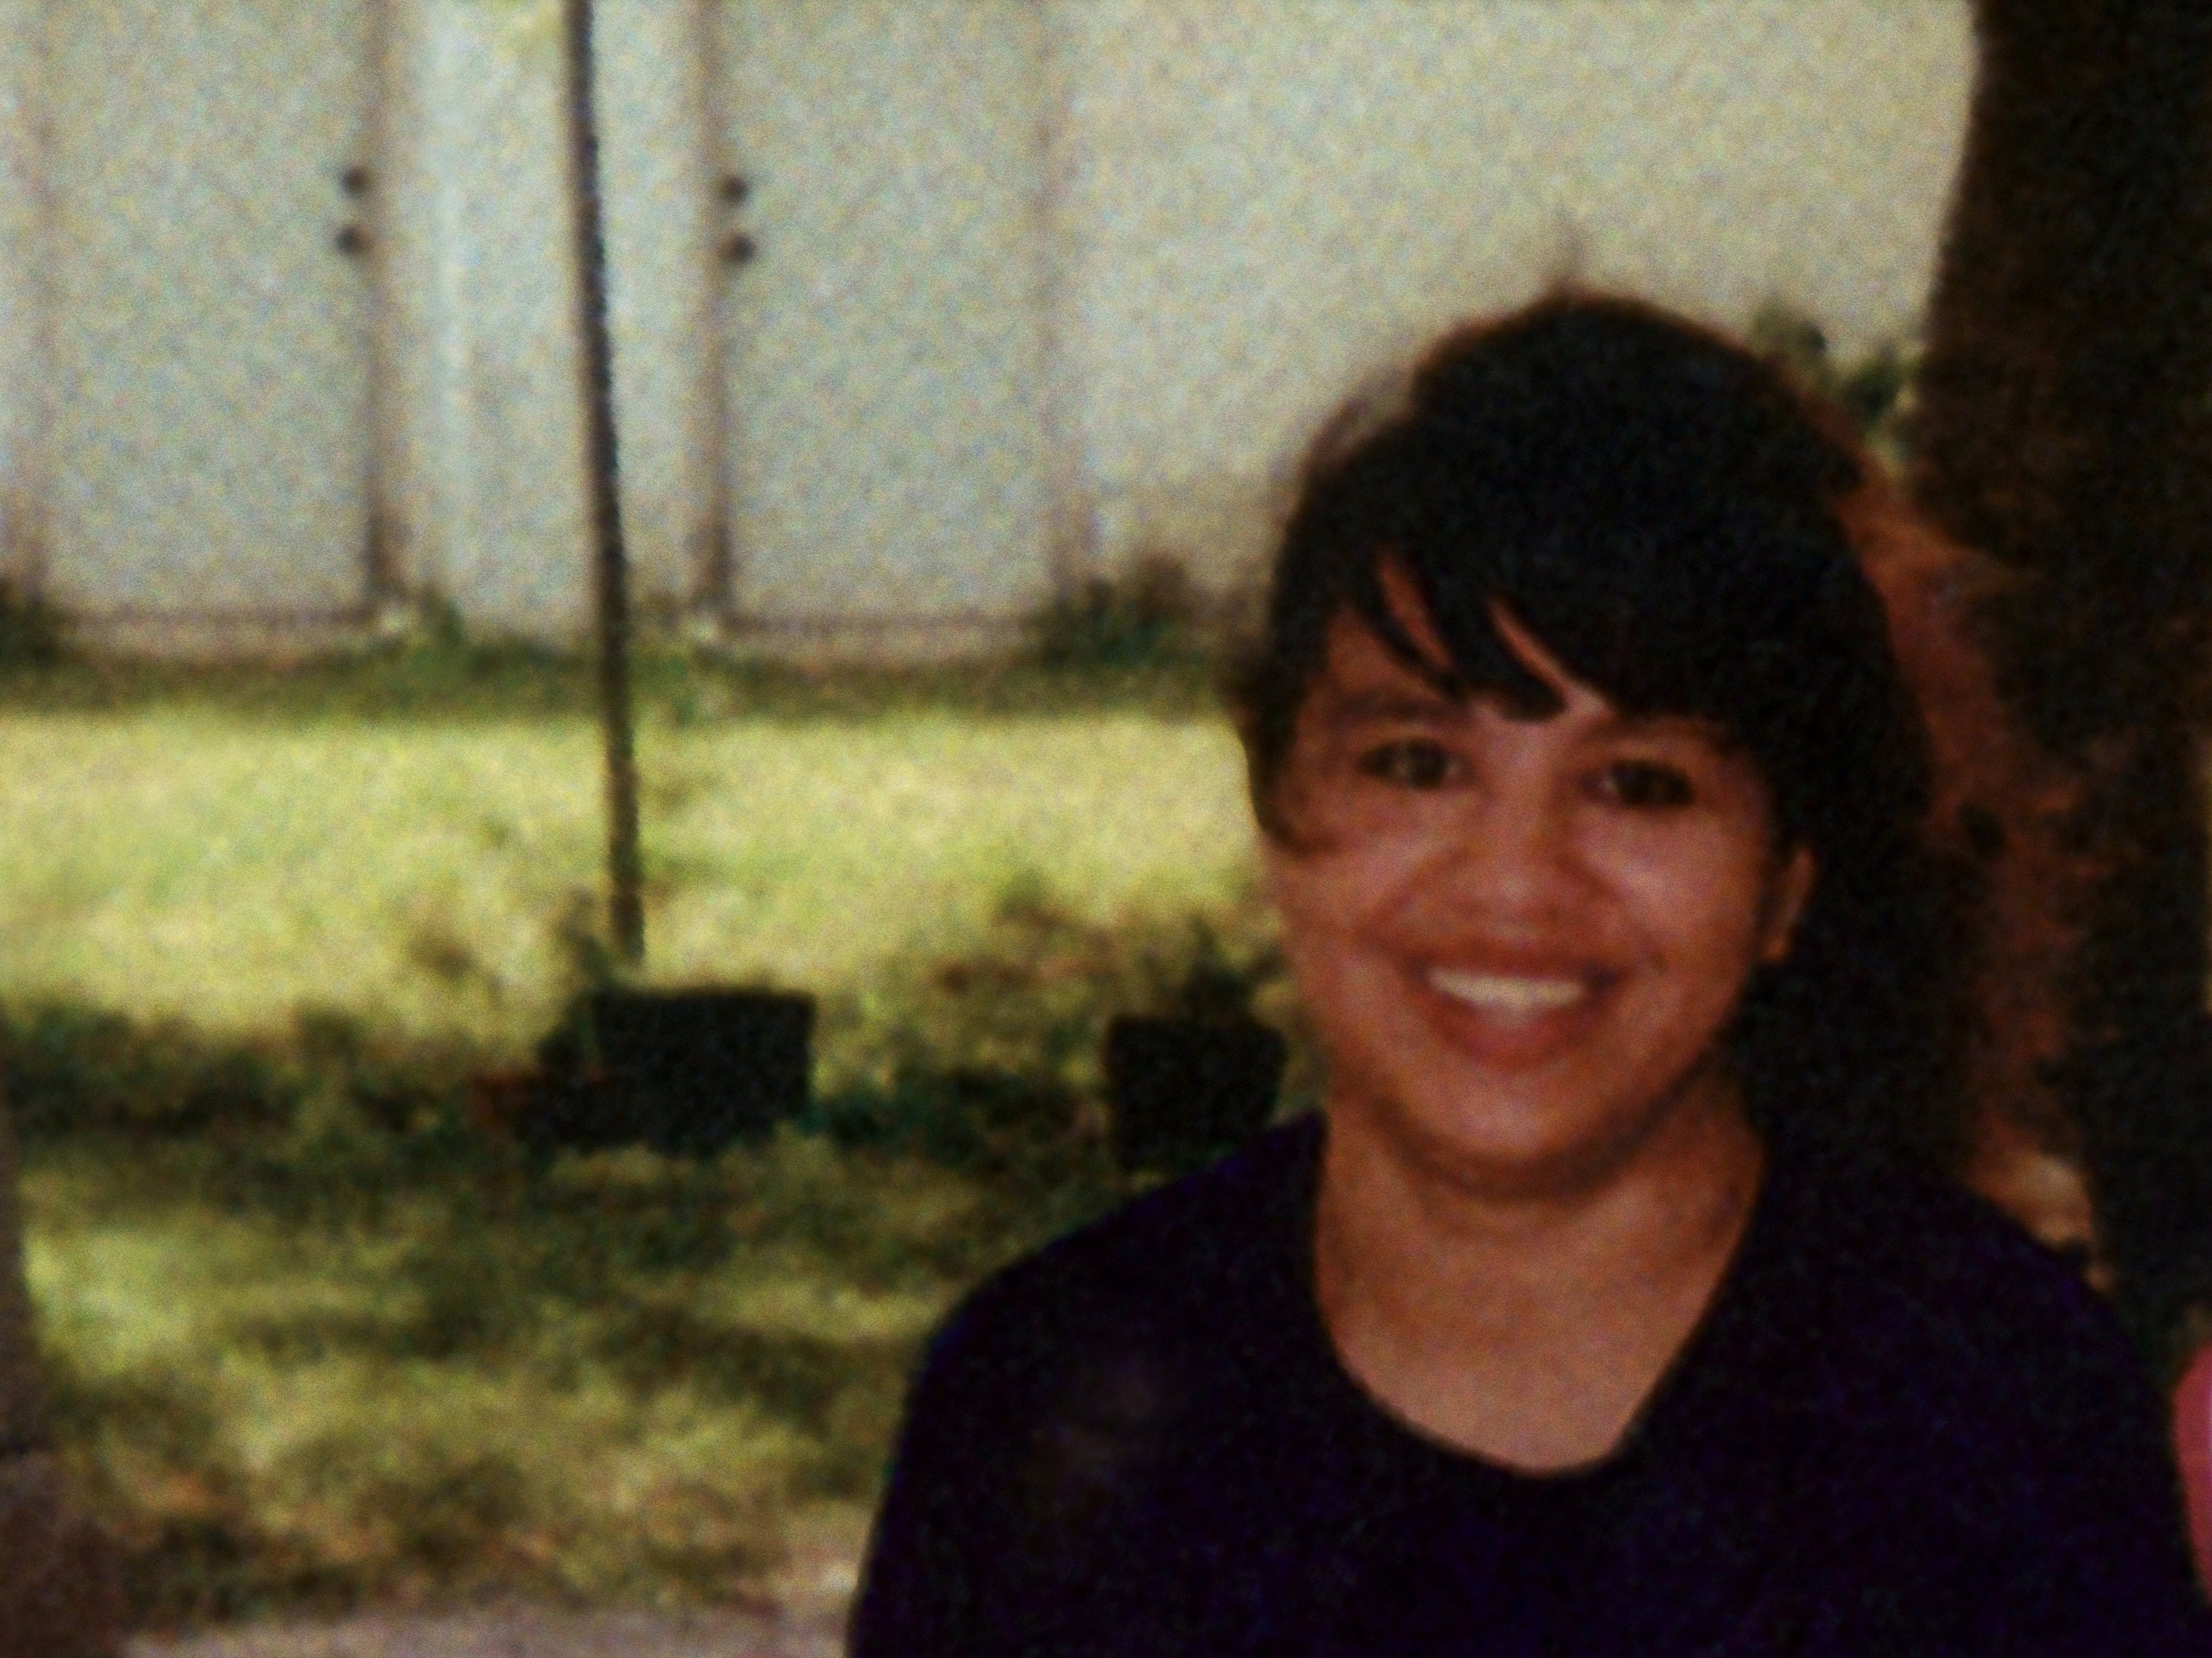 Melissa Lucio before she was convicted of murder and sent to death row in Texas